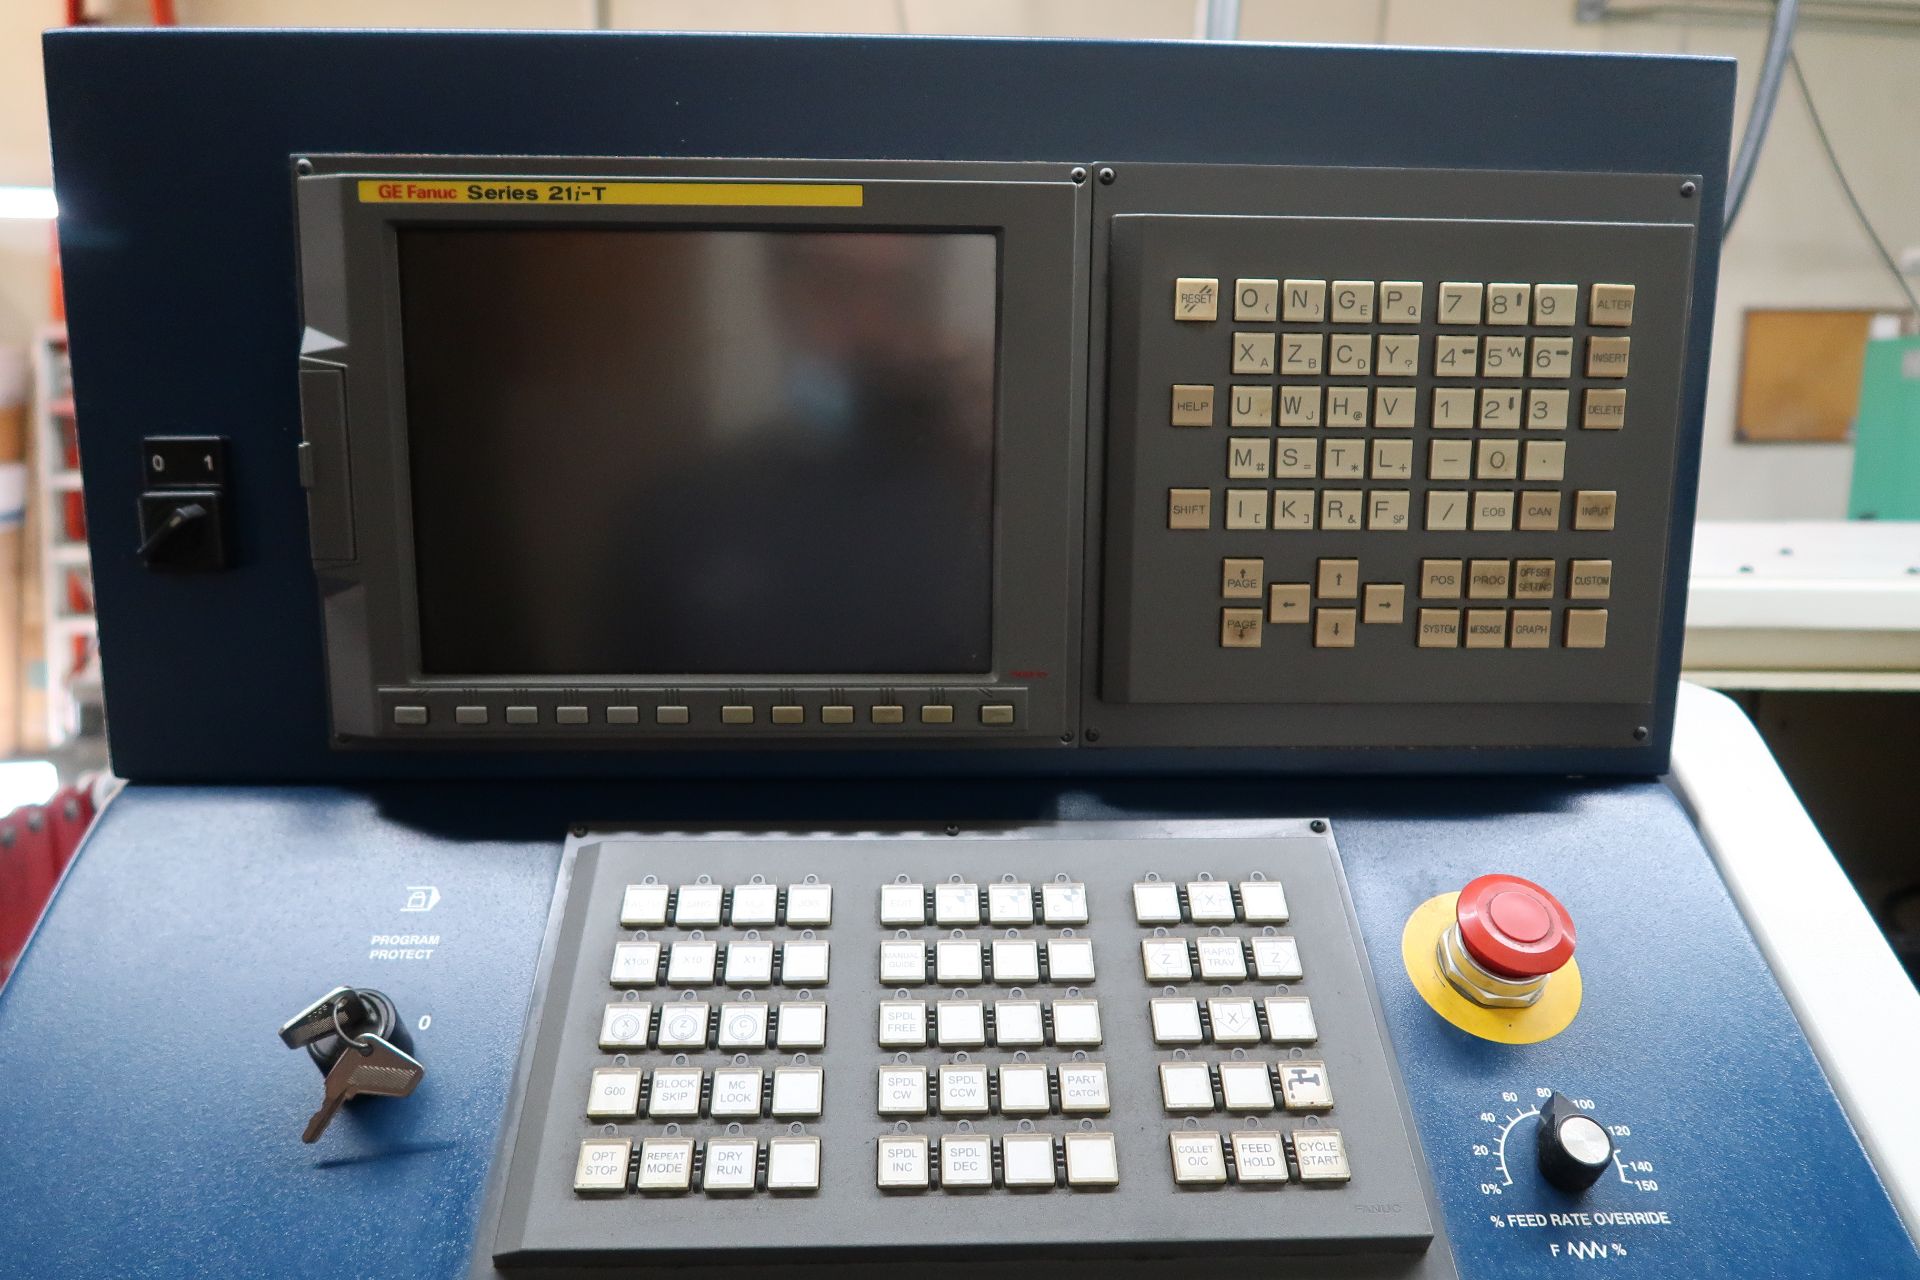 2003 Hardinge mdl. MG Conquest GT27 SP CNC Cross Slide Gang Tool lathe s/n MG-102 SOLD AS IS - Image 9 of 21